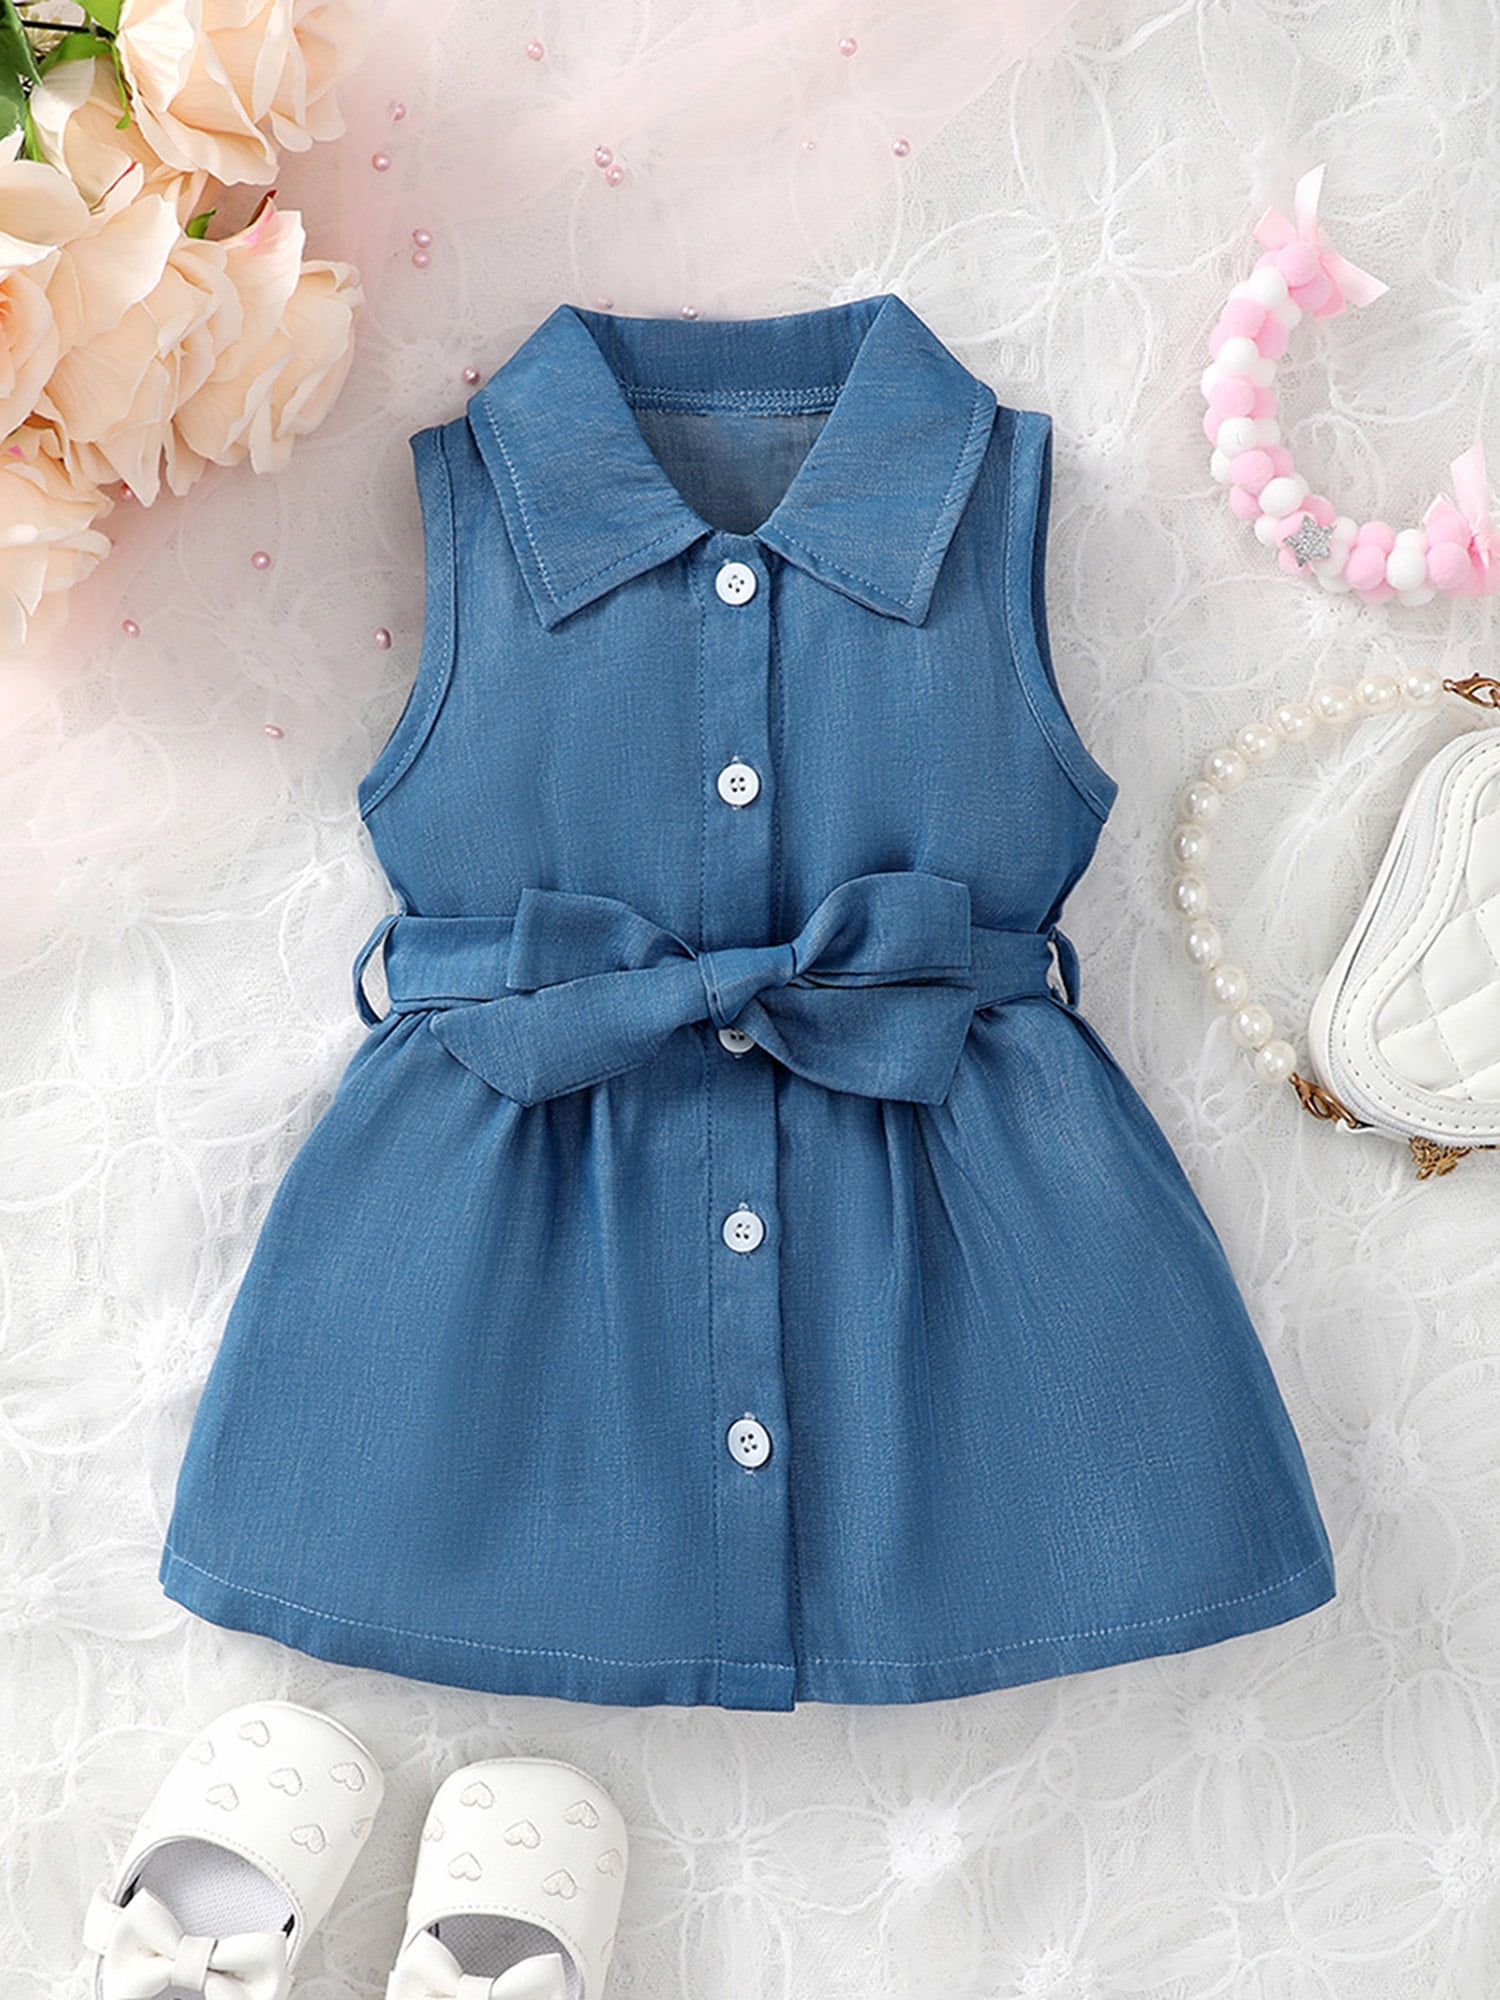 Update more than 263 denim frock for girls best